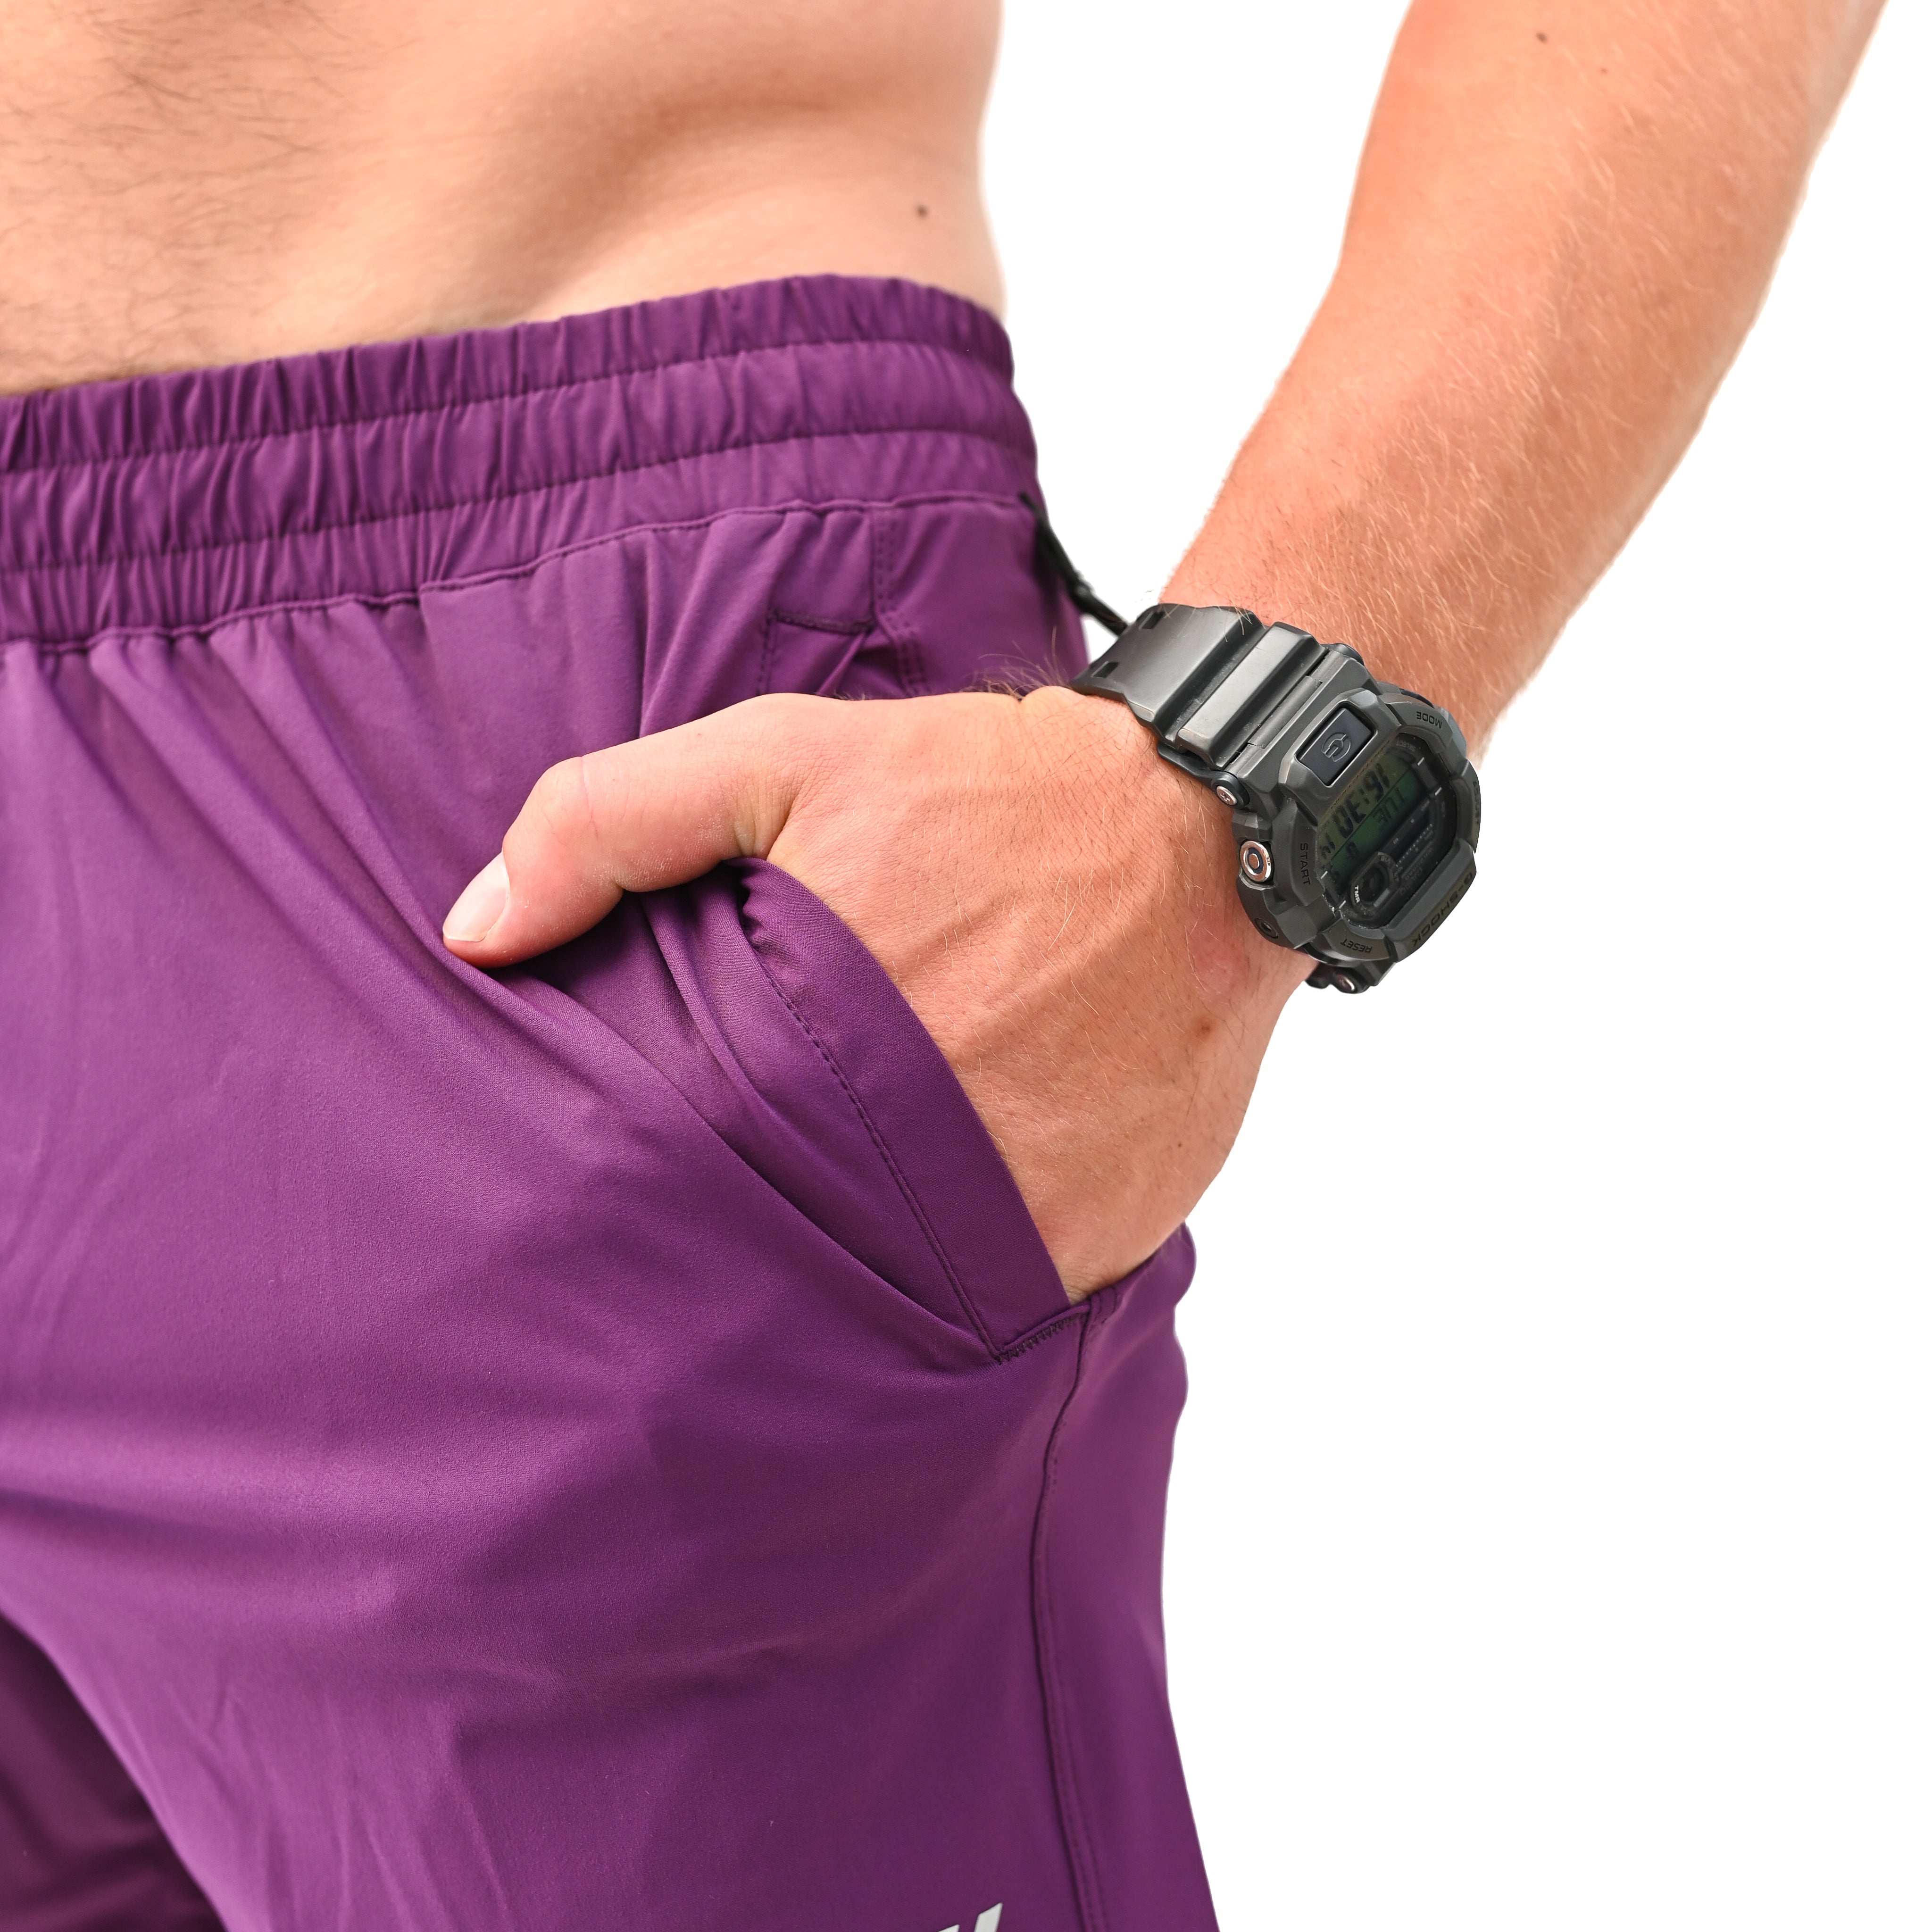 Berry 360-GO KWD shorts were created to provide the flexibility for all the movements in your training while offering the comfort and fit you have come to love through our KWD shorts. Purchase 360-GO KWD shorts from A7 UK and A7 Europe. 360-GO KWD shorts are perfect for powerlifting and weightlifting training. Available in UK and Europe including France, Italy, Germany, the Netherlands, Sweden and Poland.